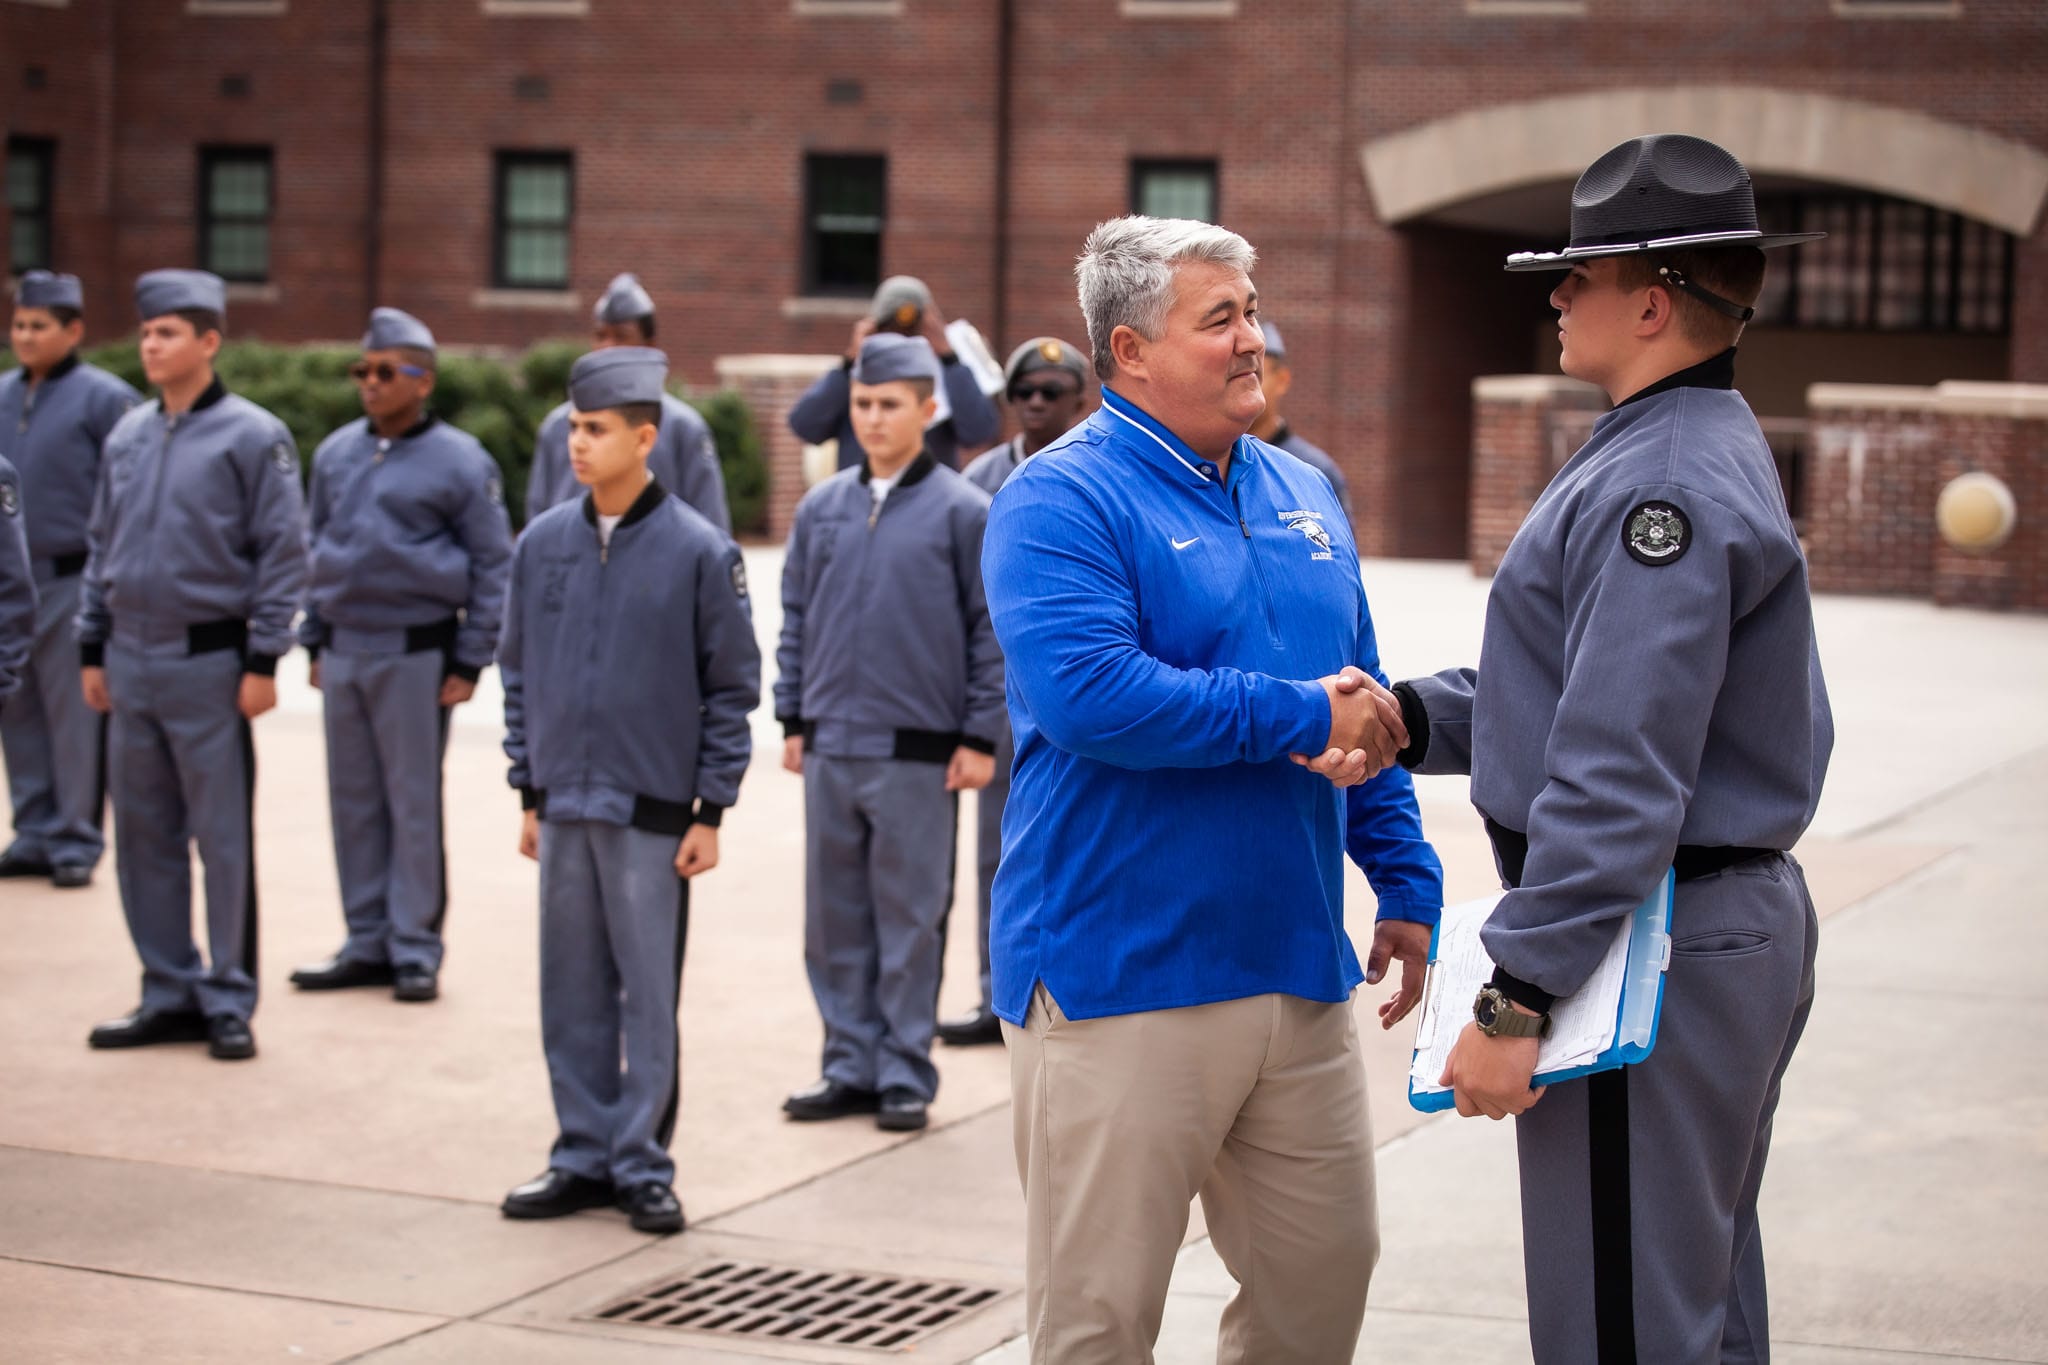 Lauren McDonald shaking hands with his son at, a cadet, at the Riverside Military Academy with other cadets in formation in the background.